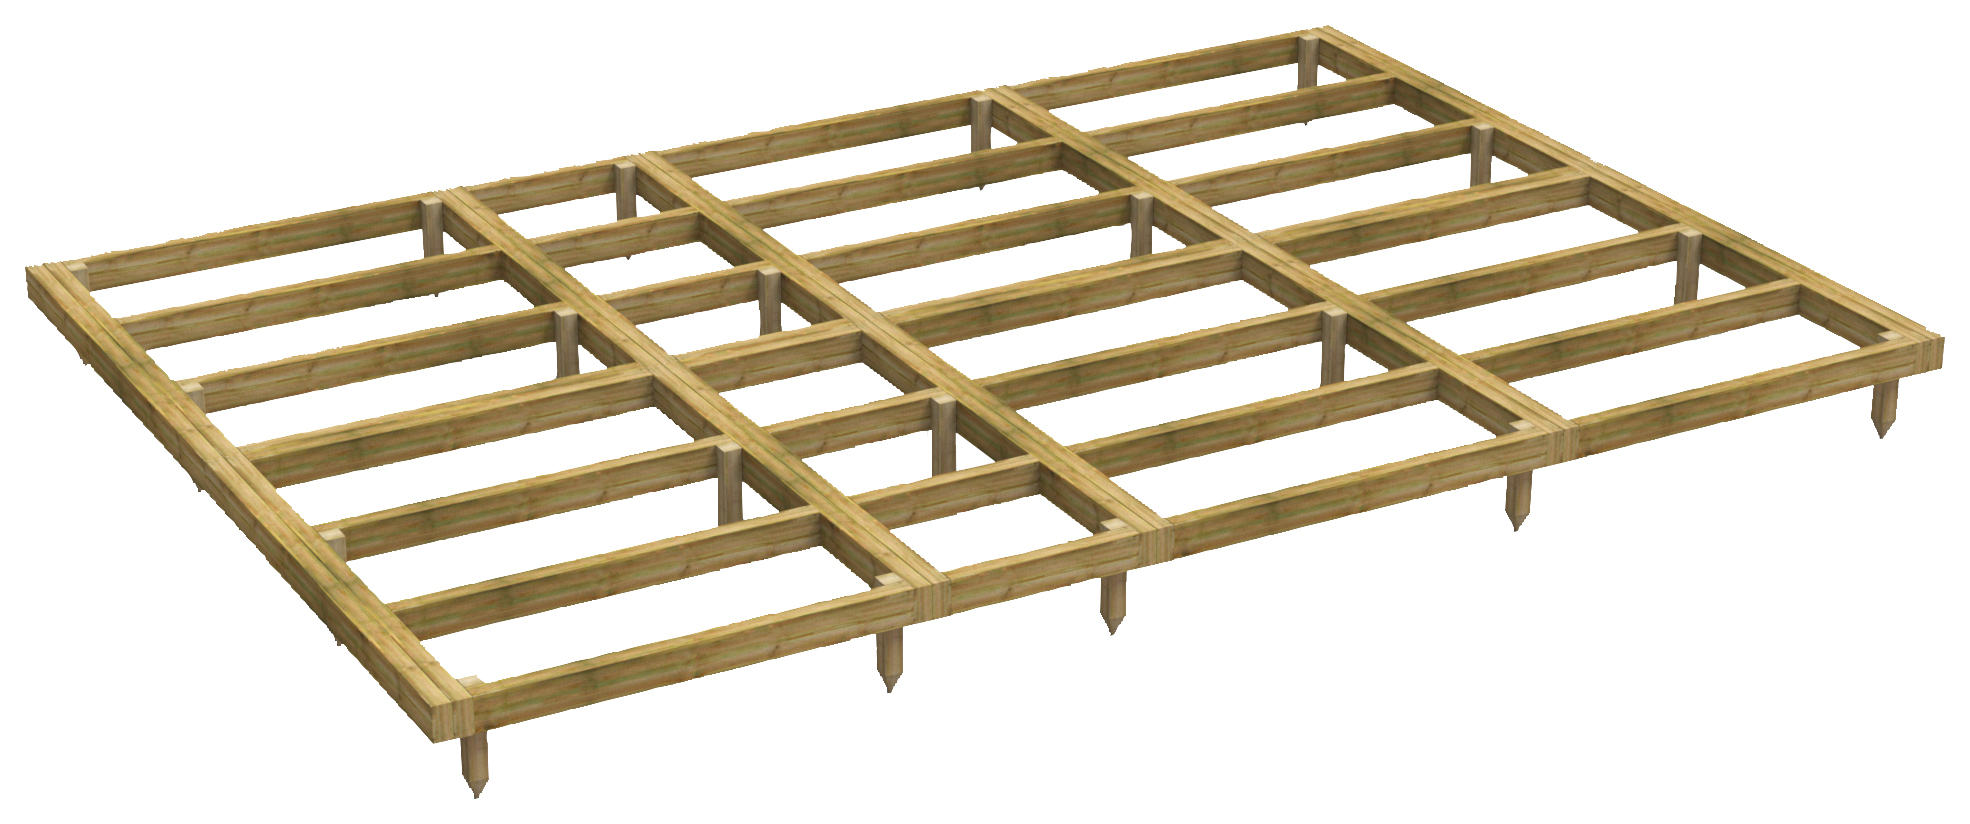 Power Sheds Pressure Treated Garden Building Base Kit - 14 x 10ft